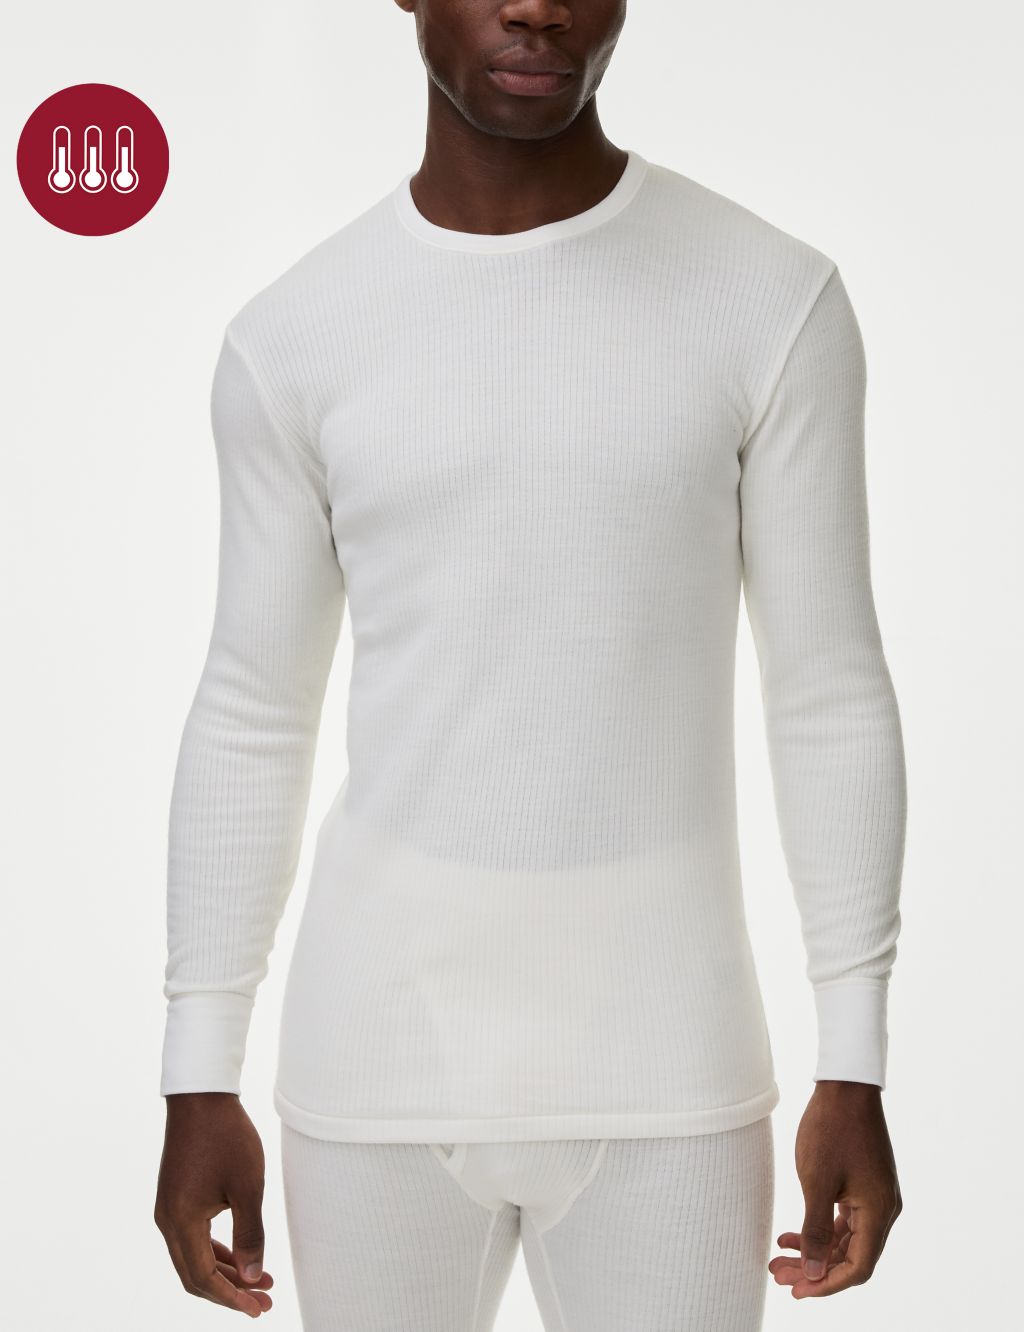 Men's Thermal Underwear | Men's Thermals Available at M&S